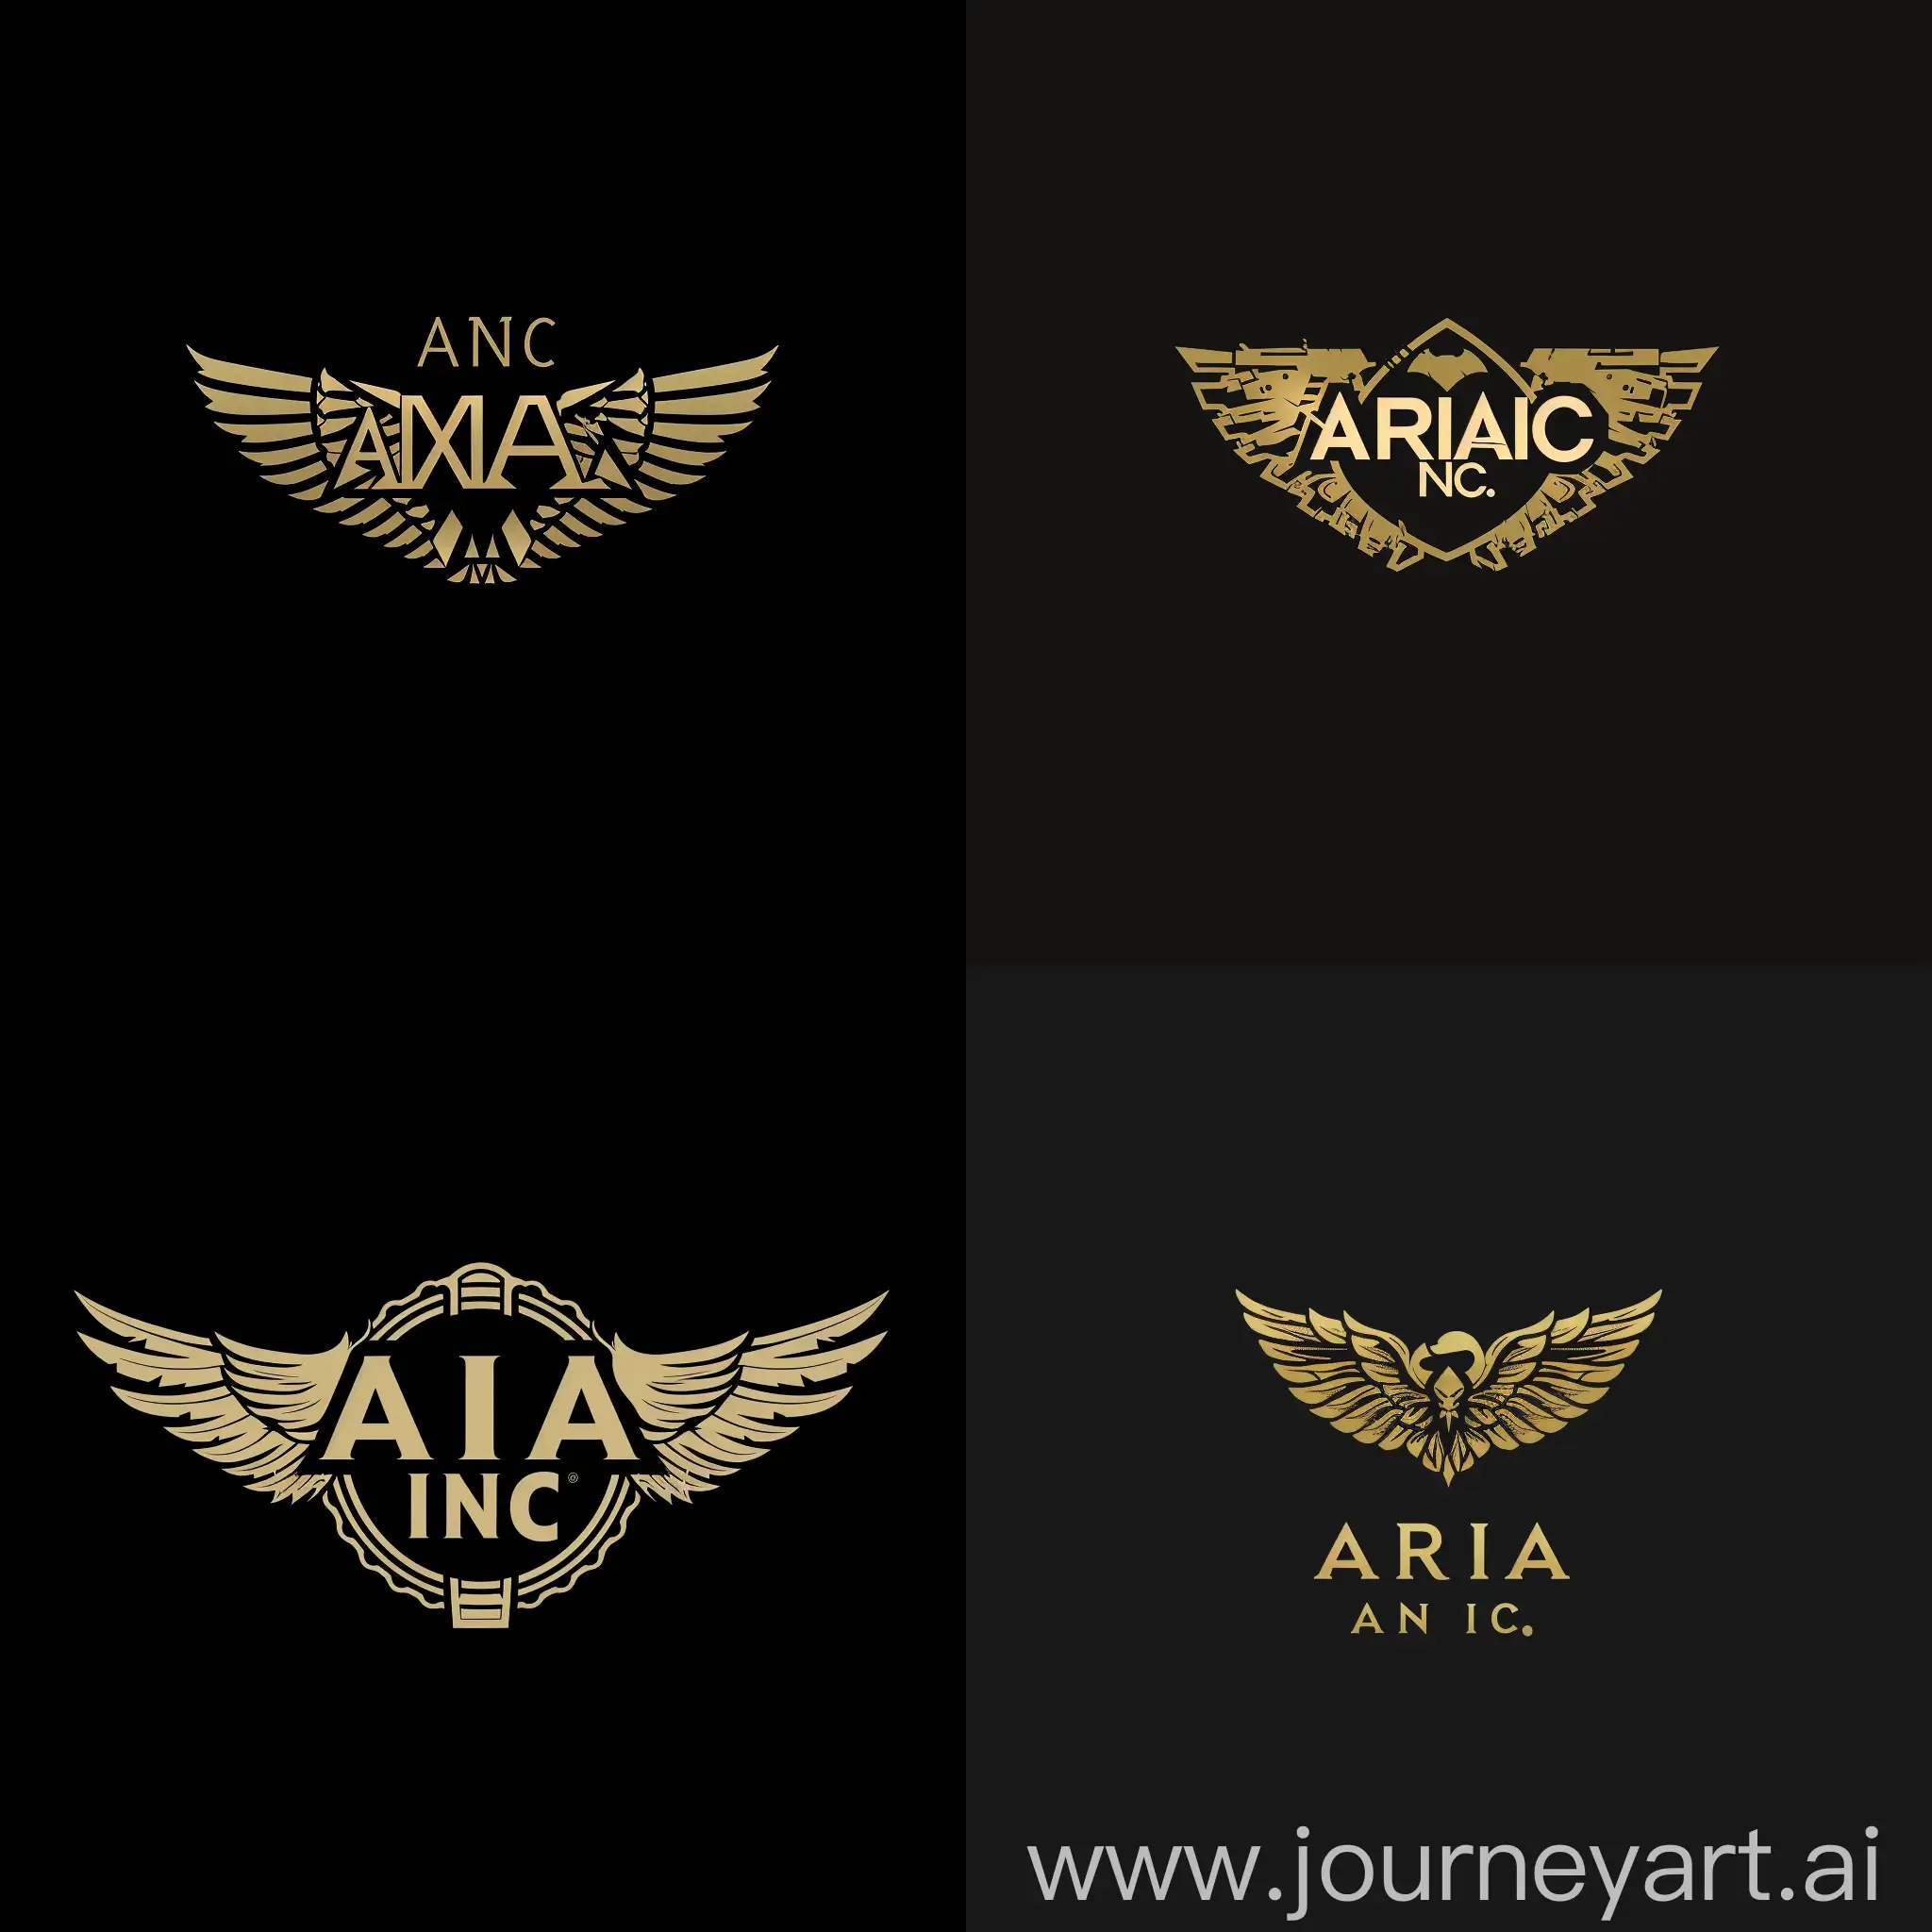 Generate a logo for a company named ARIA INC in military style name centered